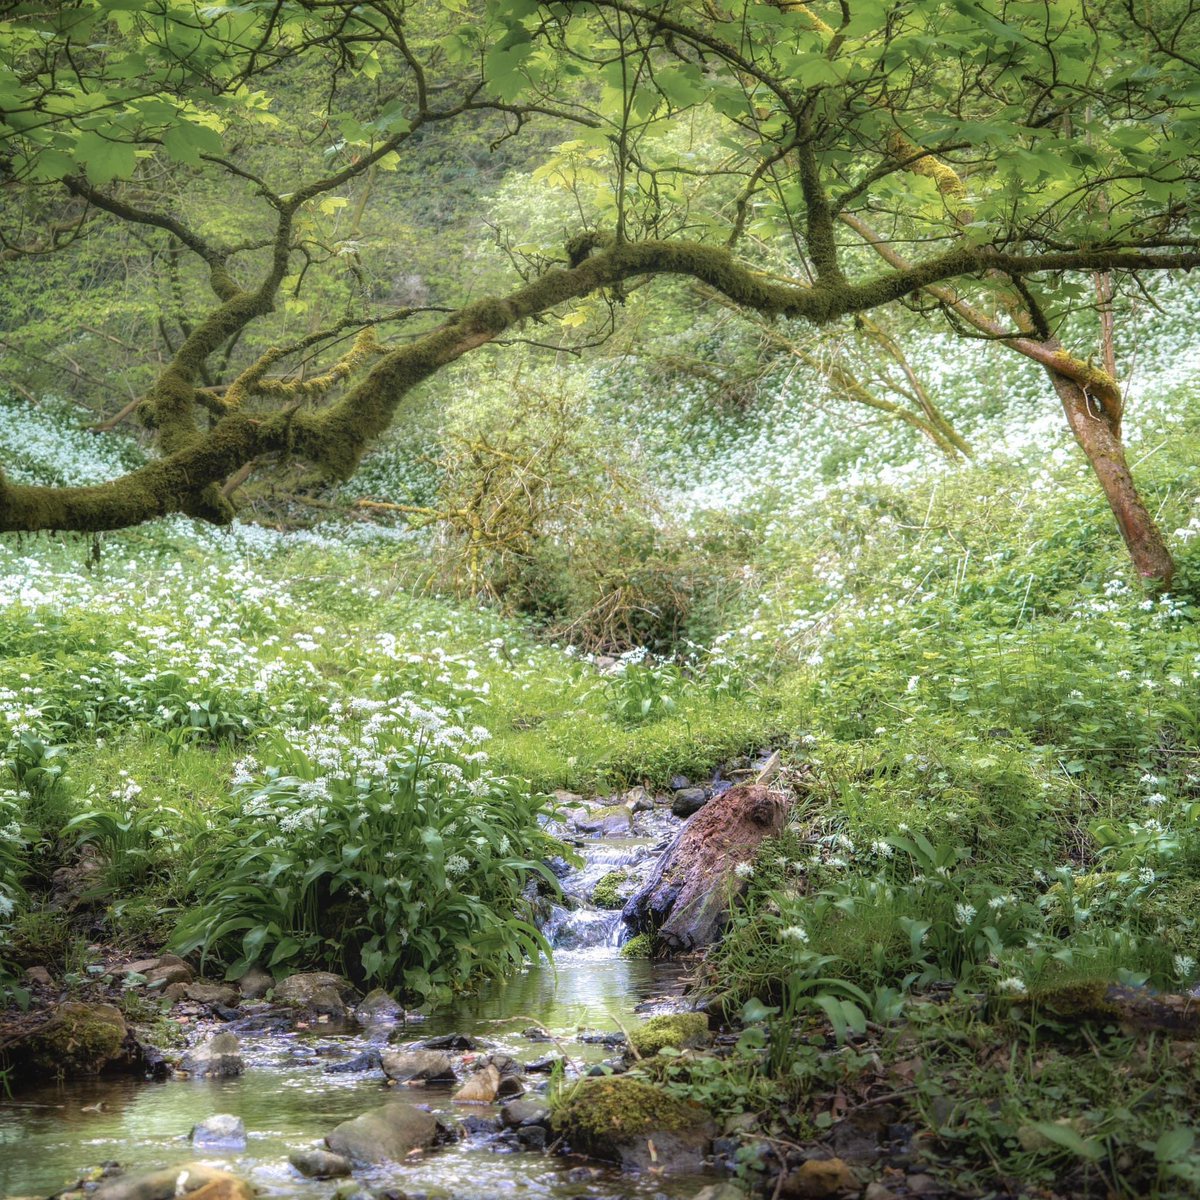 Have you ever chanced upon a place so beautiful and perfect, that afterwards you’ve wondered whether you imagined it all? I’m pleased I have photographs of this little fairy glade, and the smell of garlic still on my wellies, or I might have thought it a dream. #peakdistrict